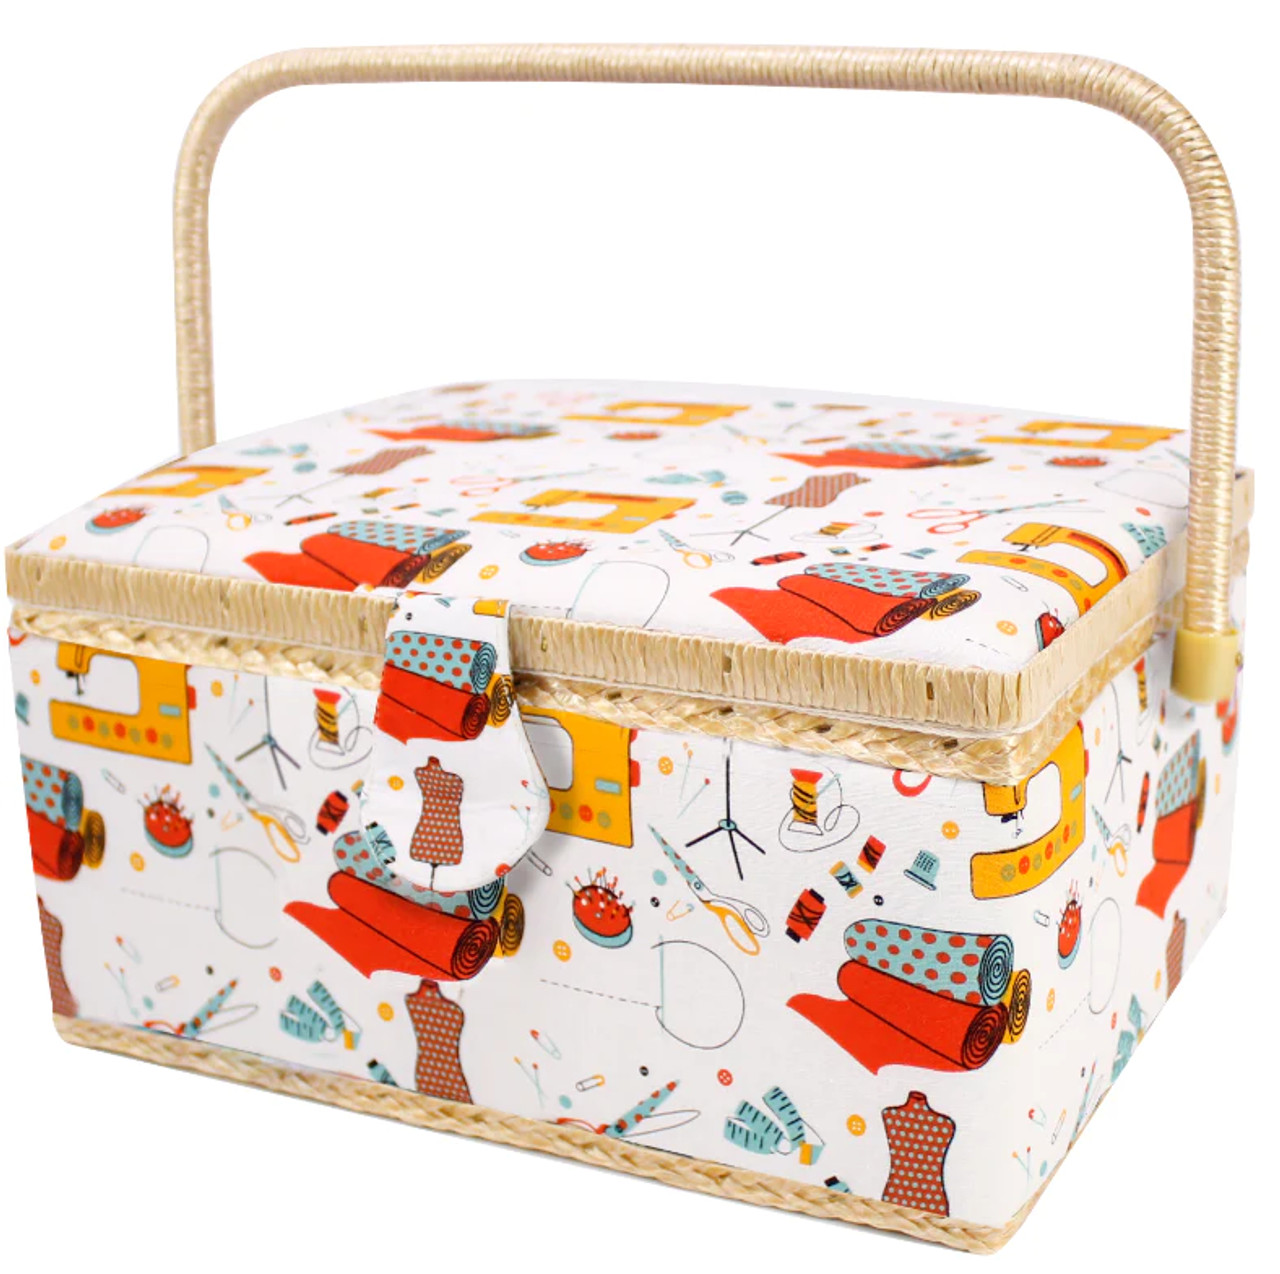 Sewing Basket with carry handle, padded fabric cover, lining , 3 small pockets, pincushion & lift-out tray